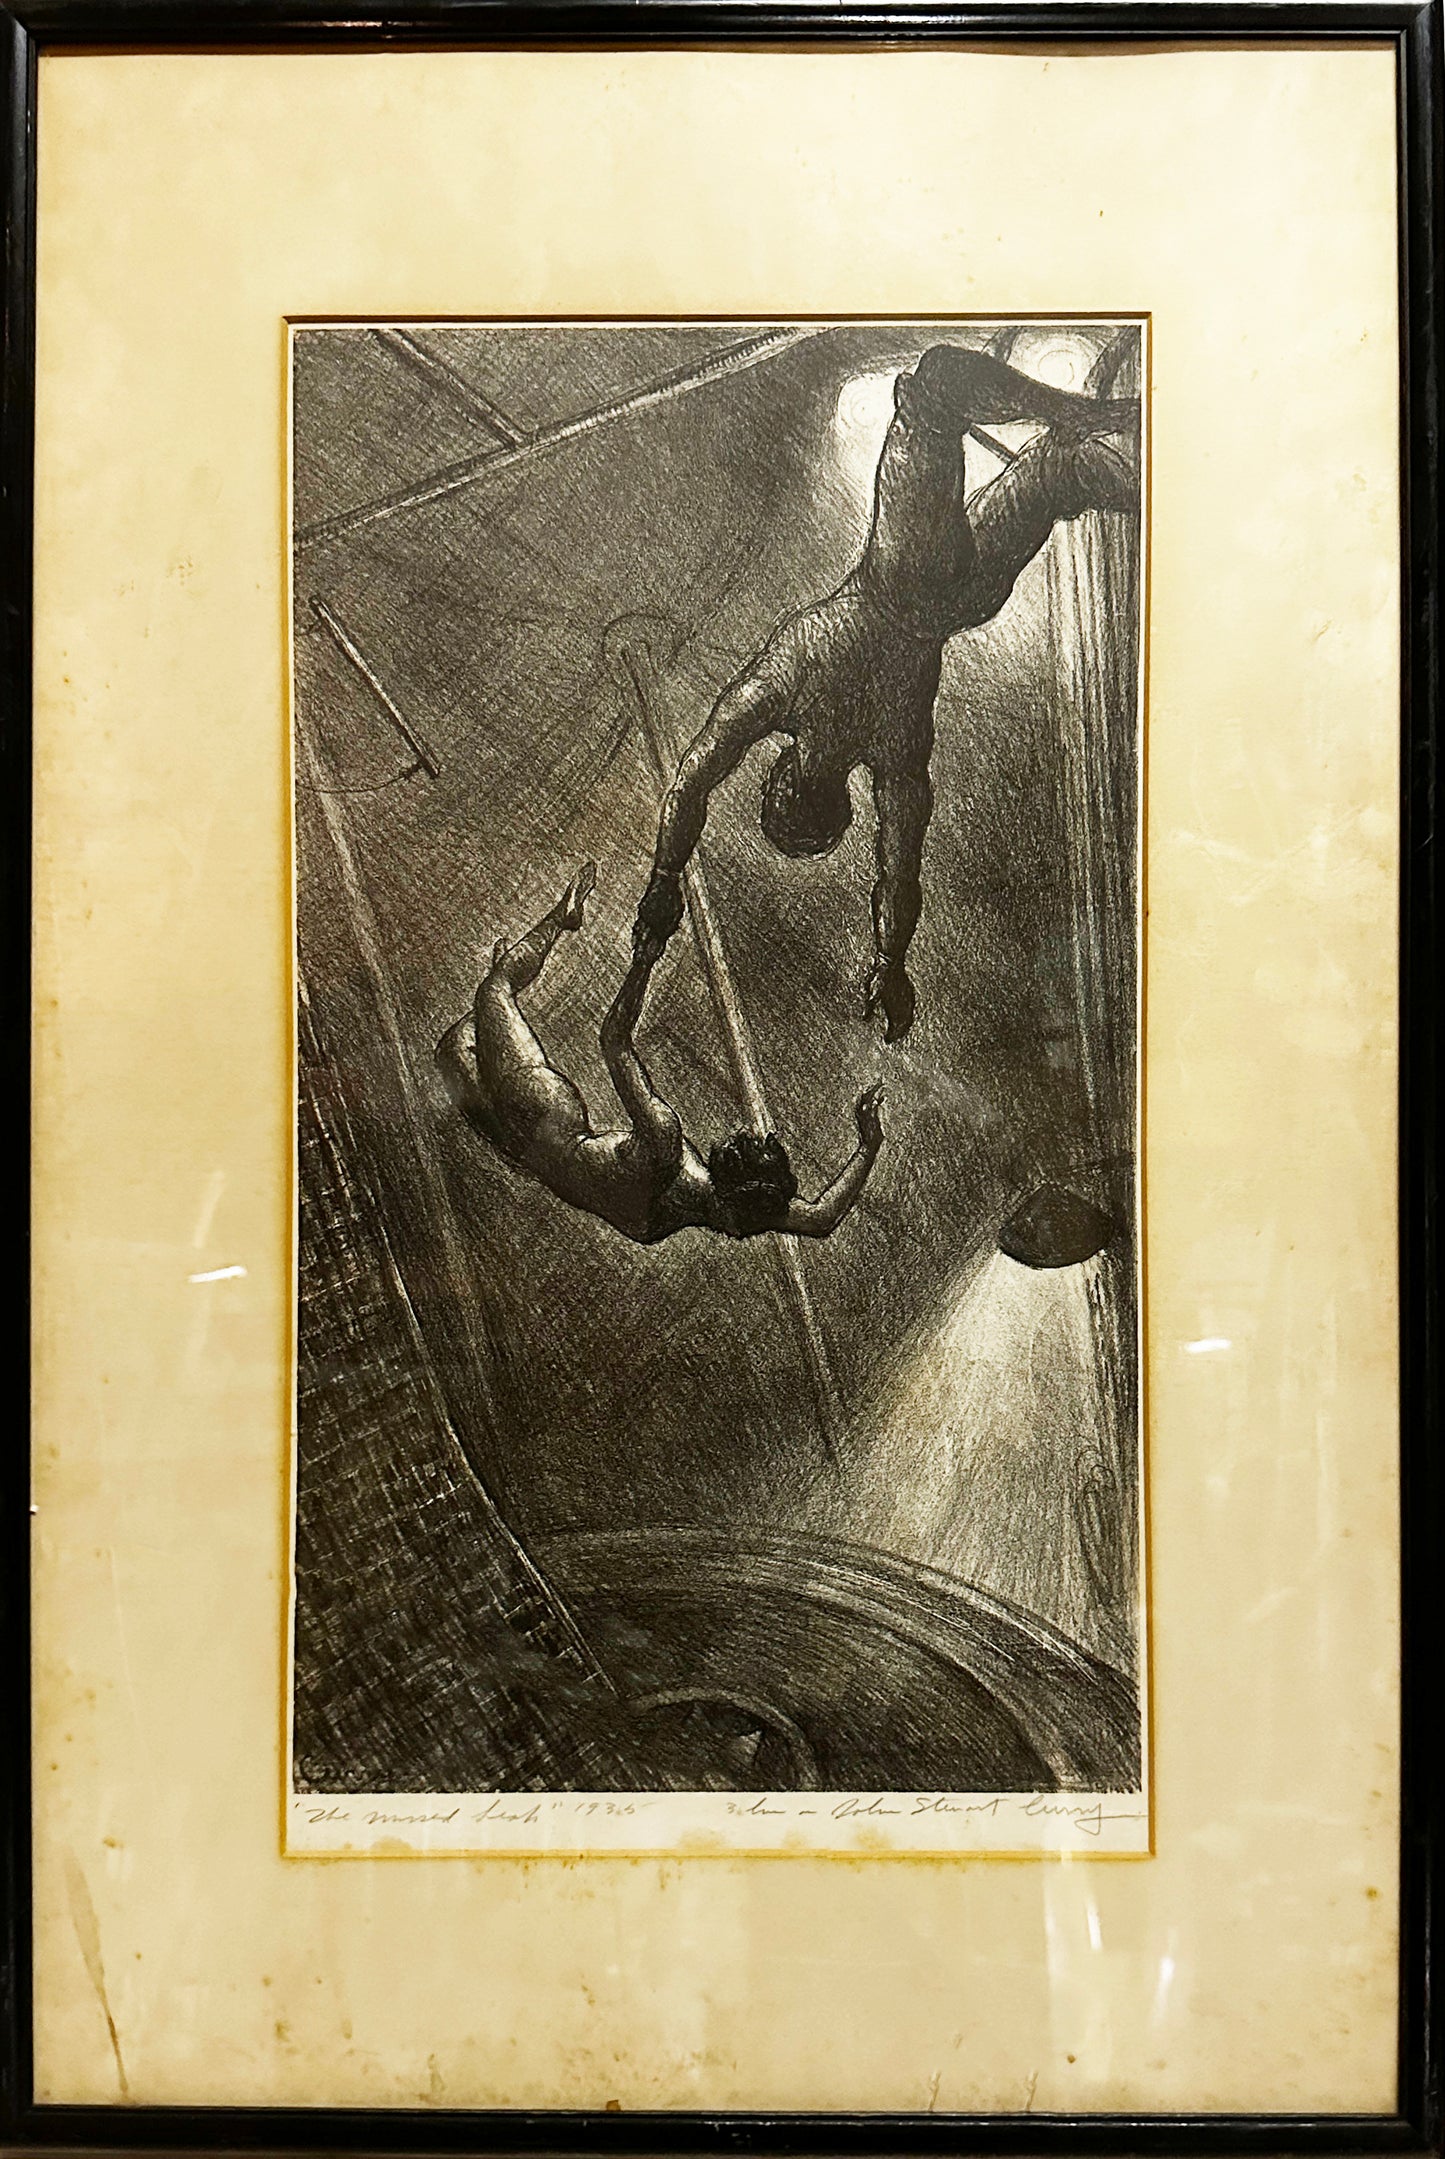 John Steuart Curry Lithograph: "The Missed Leap", 1935